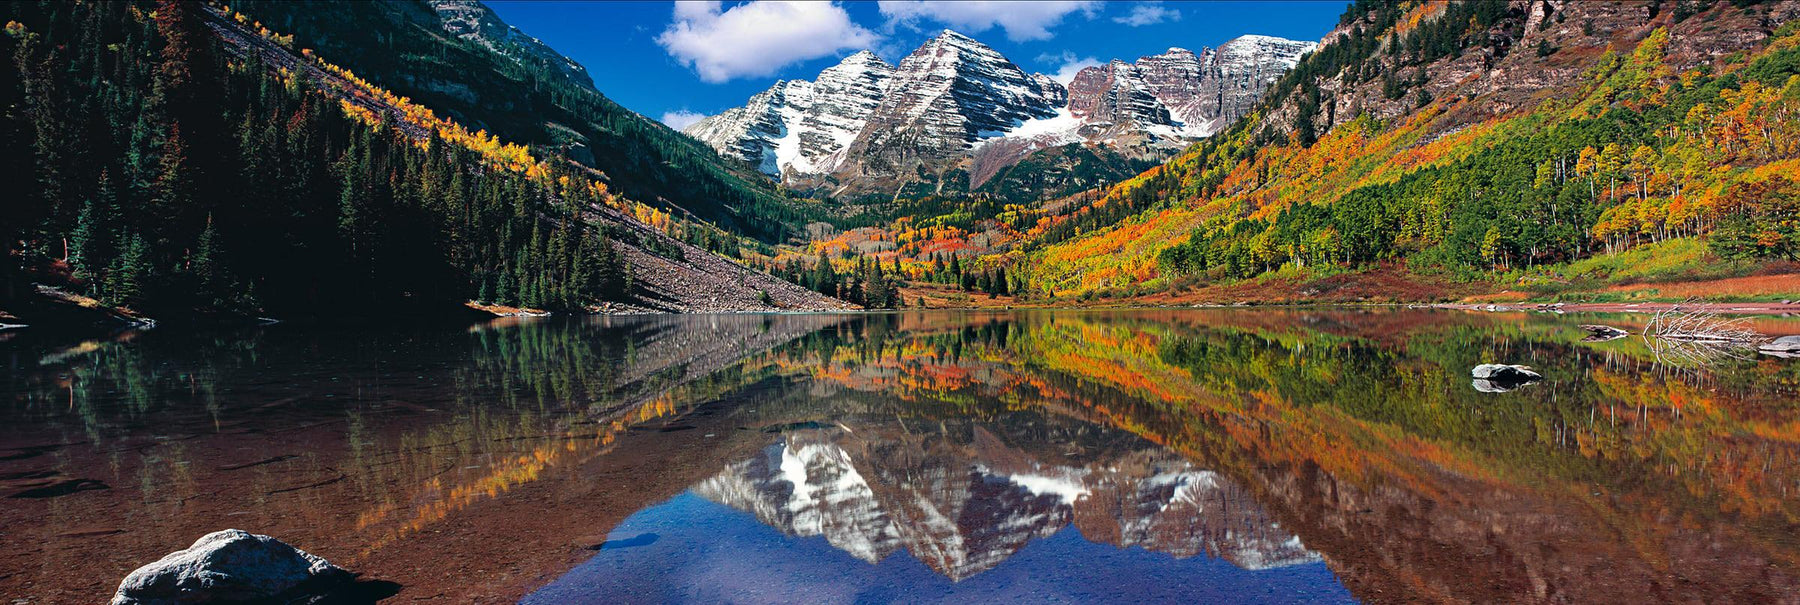 Maroon Lake reflecting the Autumn forest and two snow covered peaks of Maroon Bells Colorado